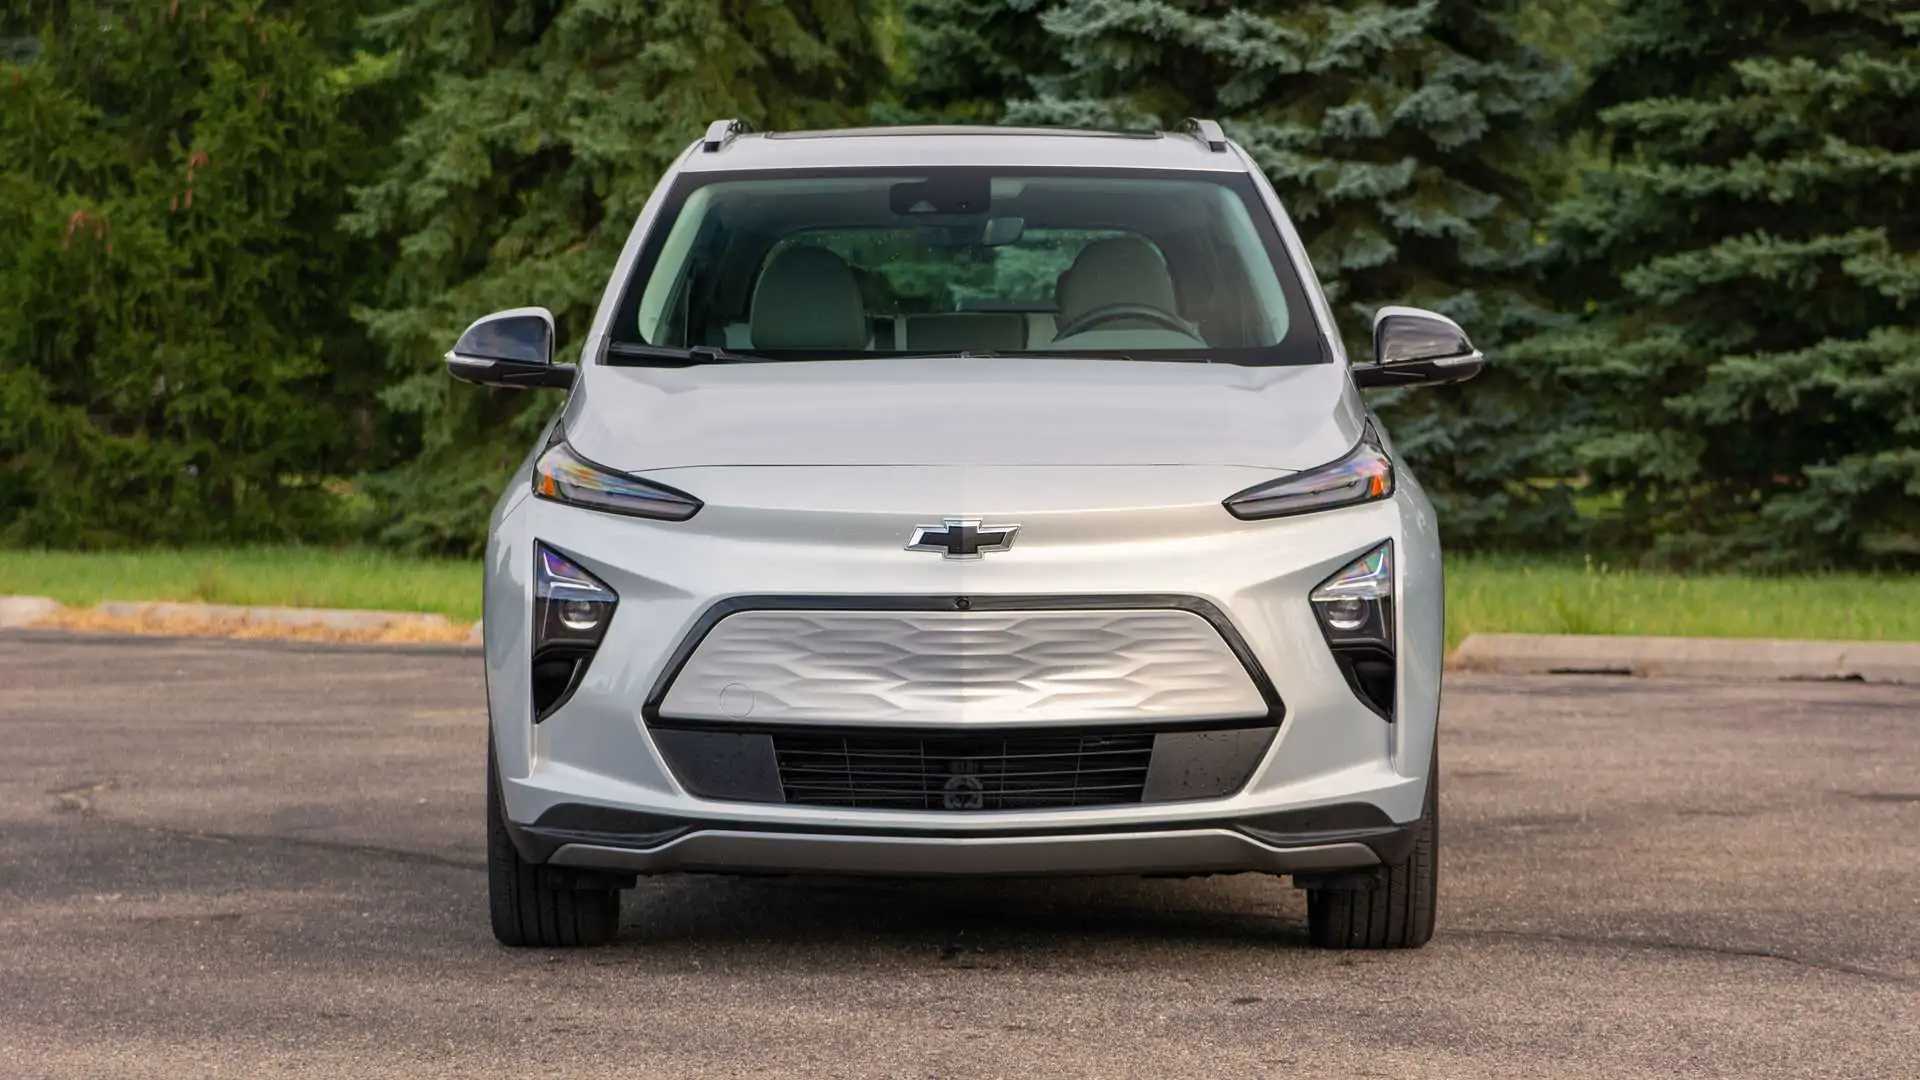 gm and honda ditch plans to make cheap electric cars together